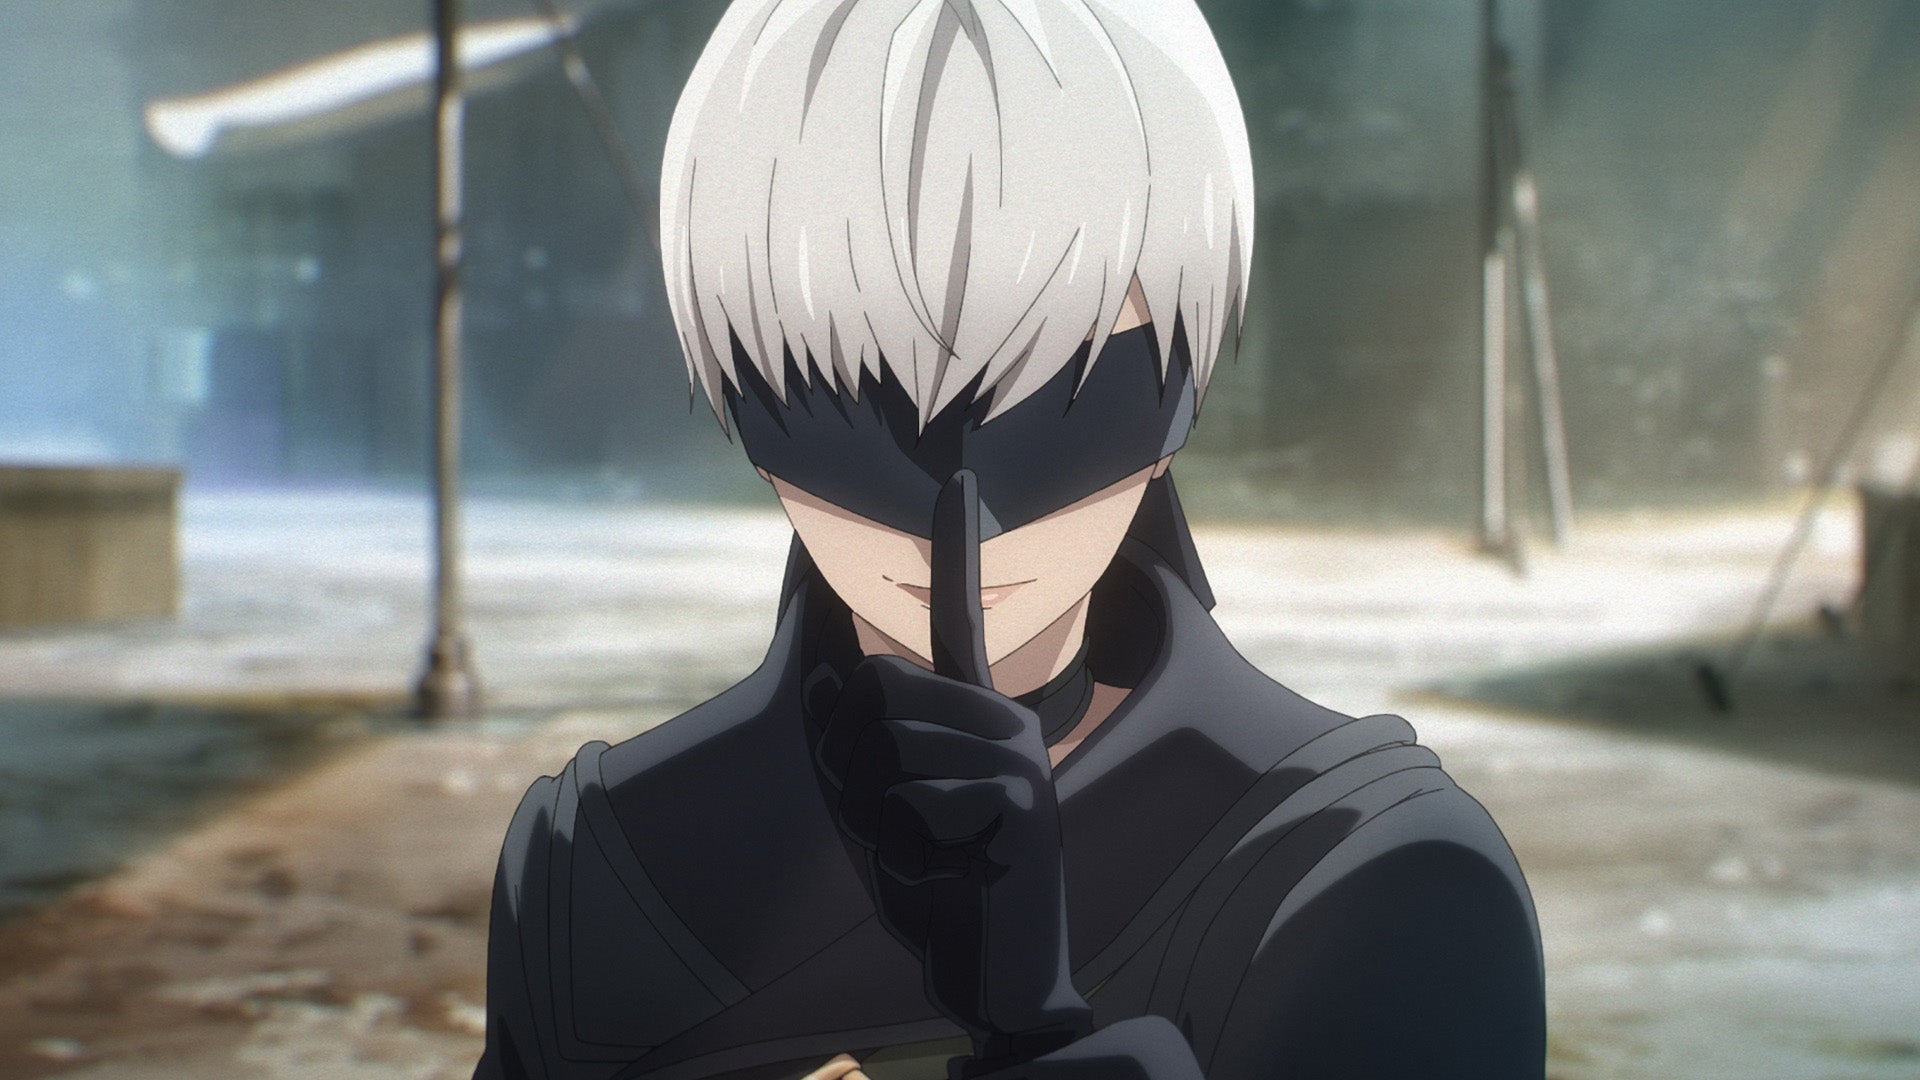 Nier Automata Ver11a anime adaptation pauses production indefinitely   VG247